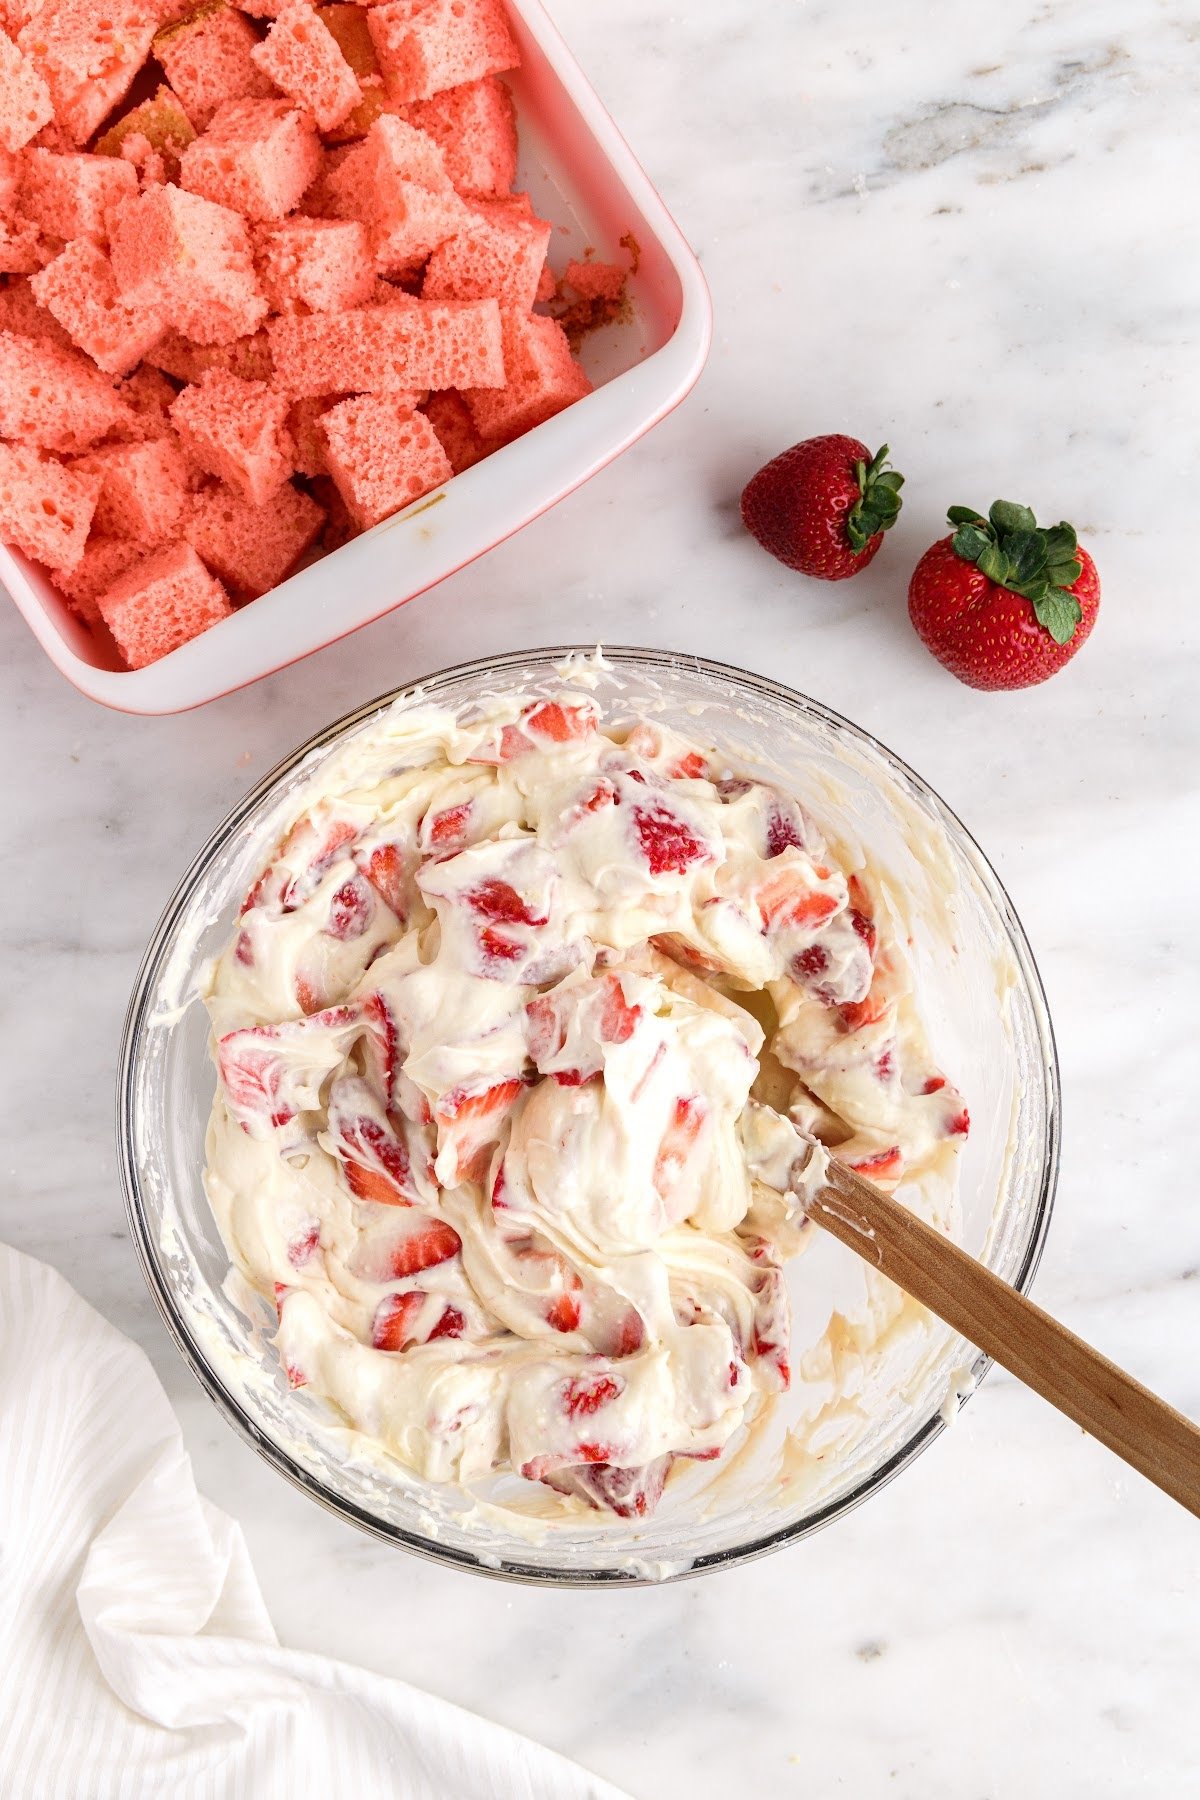 Pudding cheesecake mixture combined with fresh strawberry pieces in glass mixing bowl.